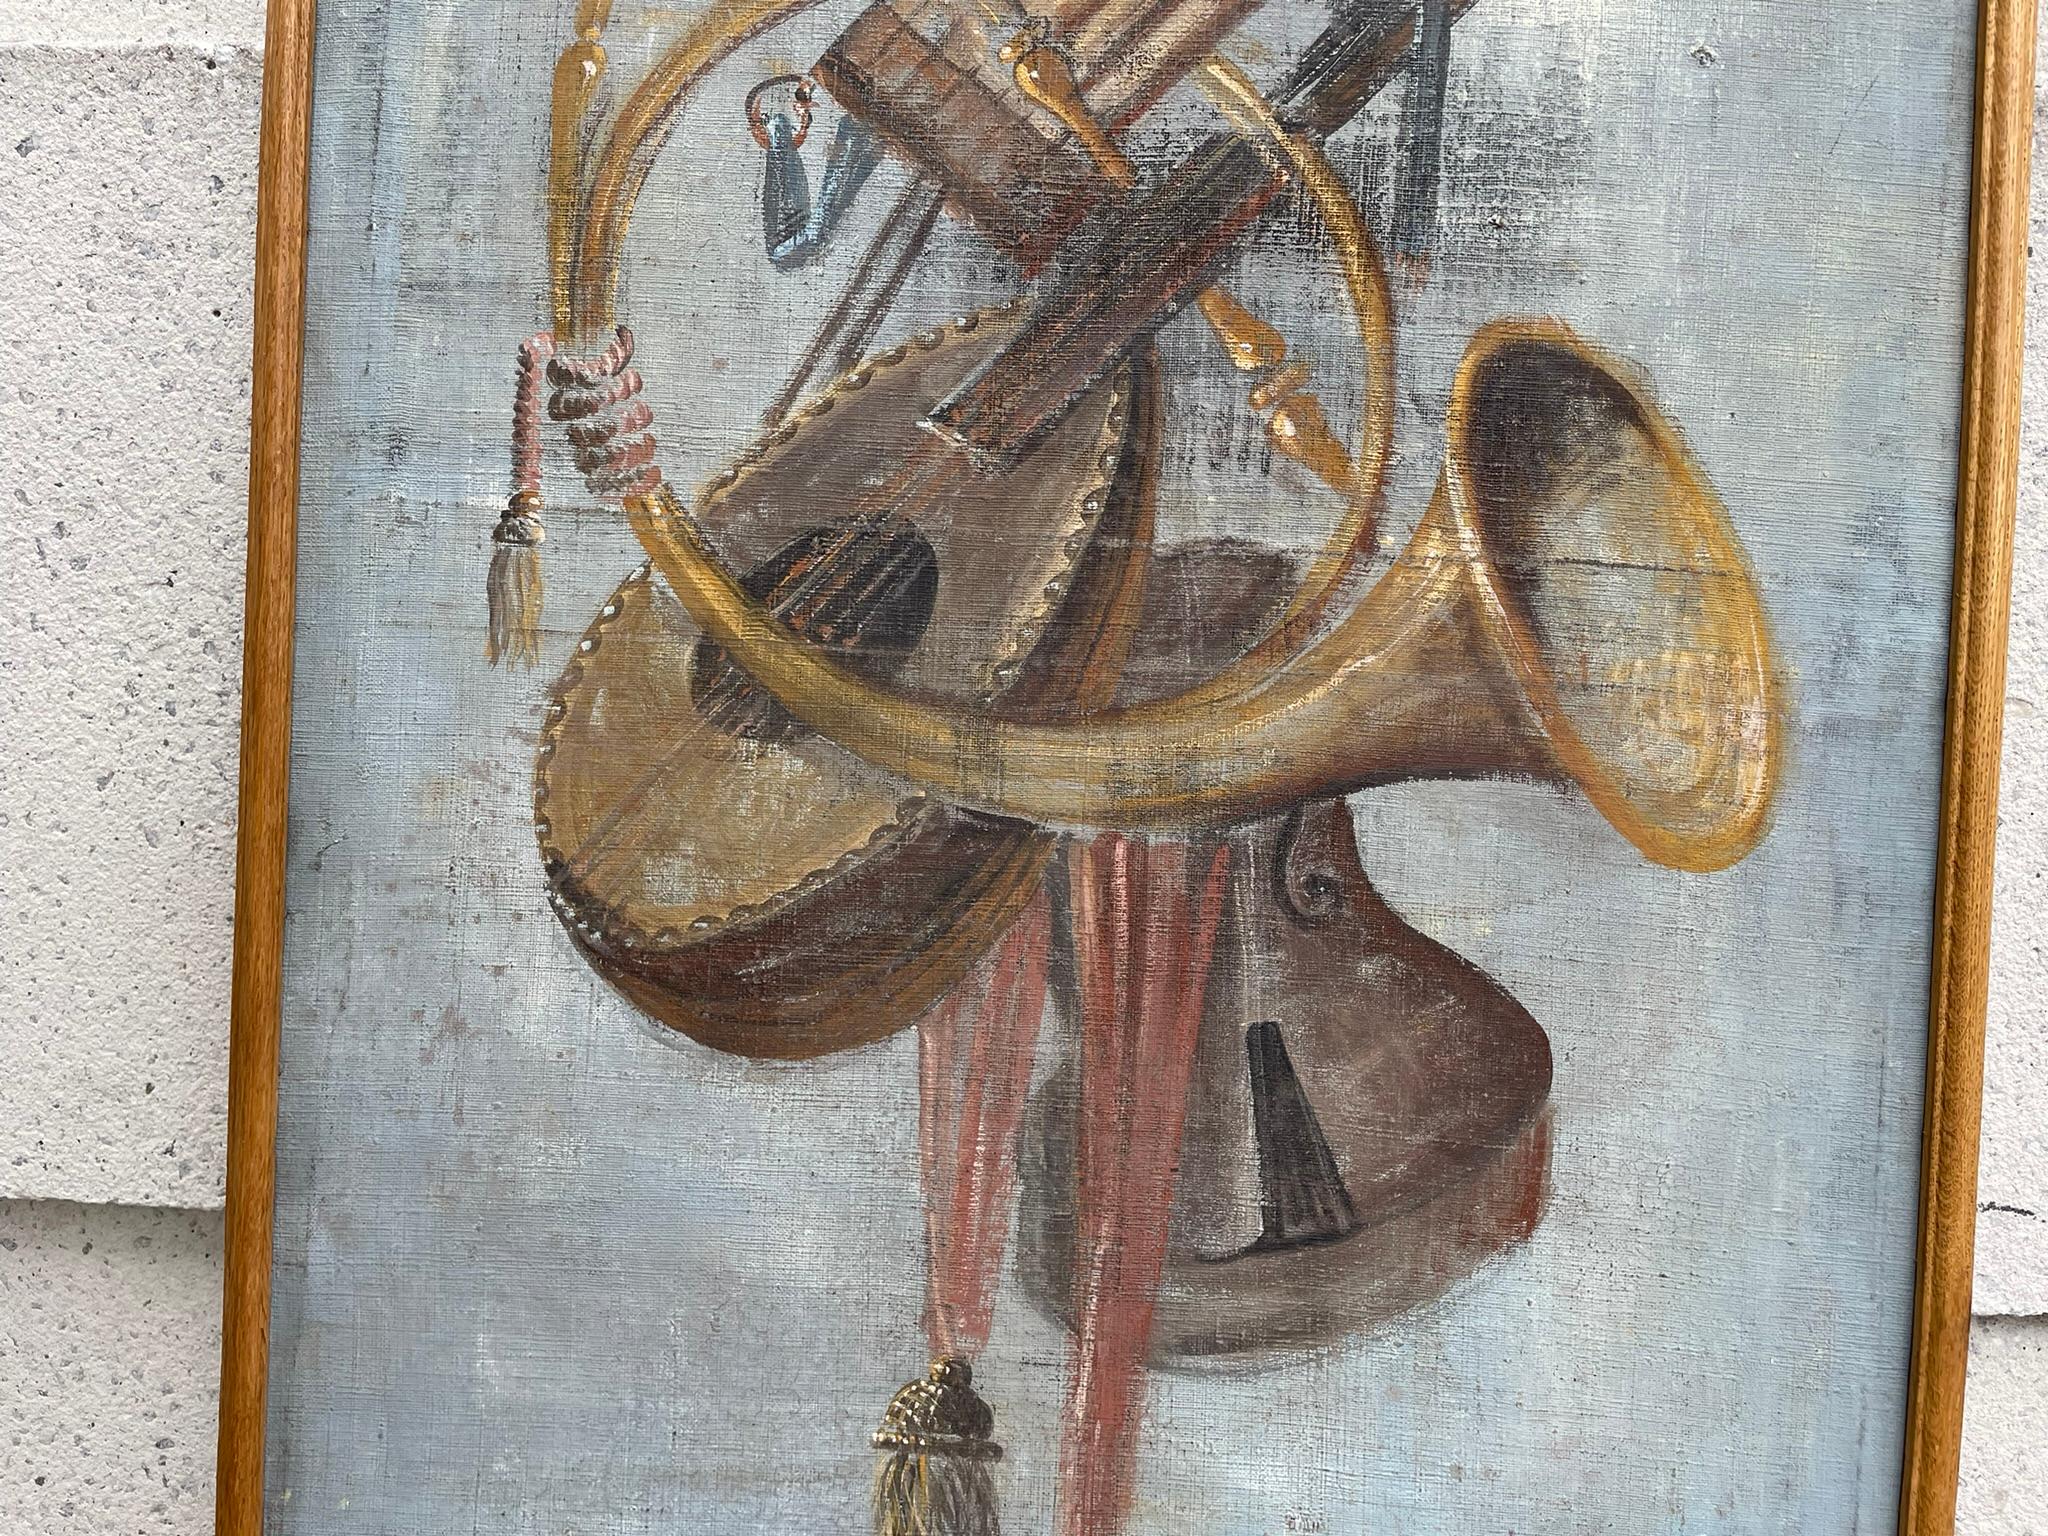 18th Century Italian Trompe L'Oeil Painting On Canvas Of Musical Instruments In Good Condition For Sale In Stamford, CT